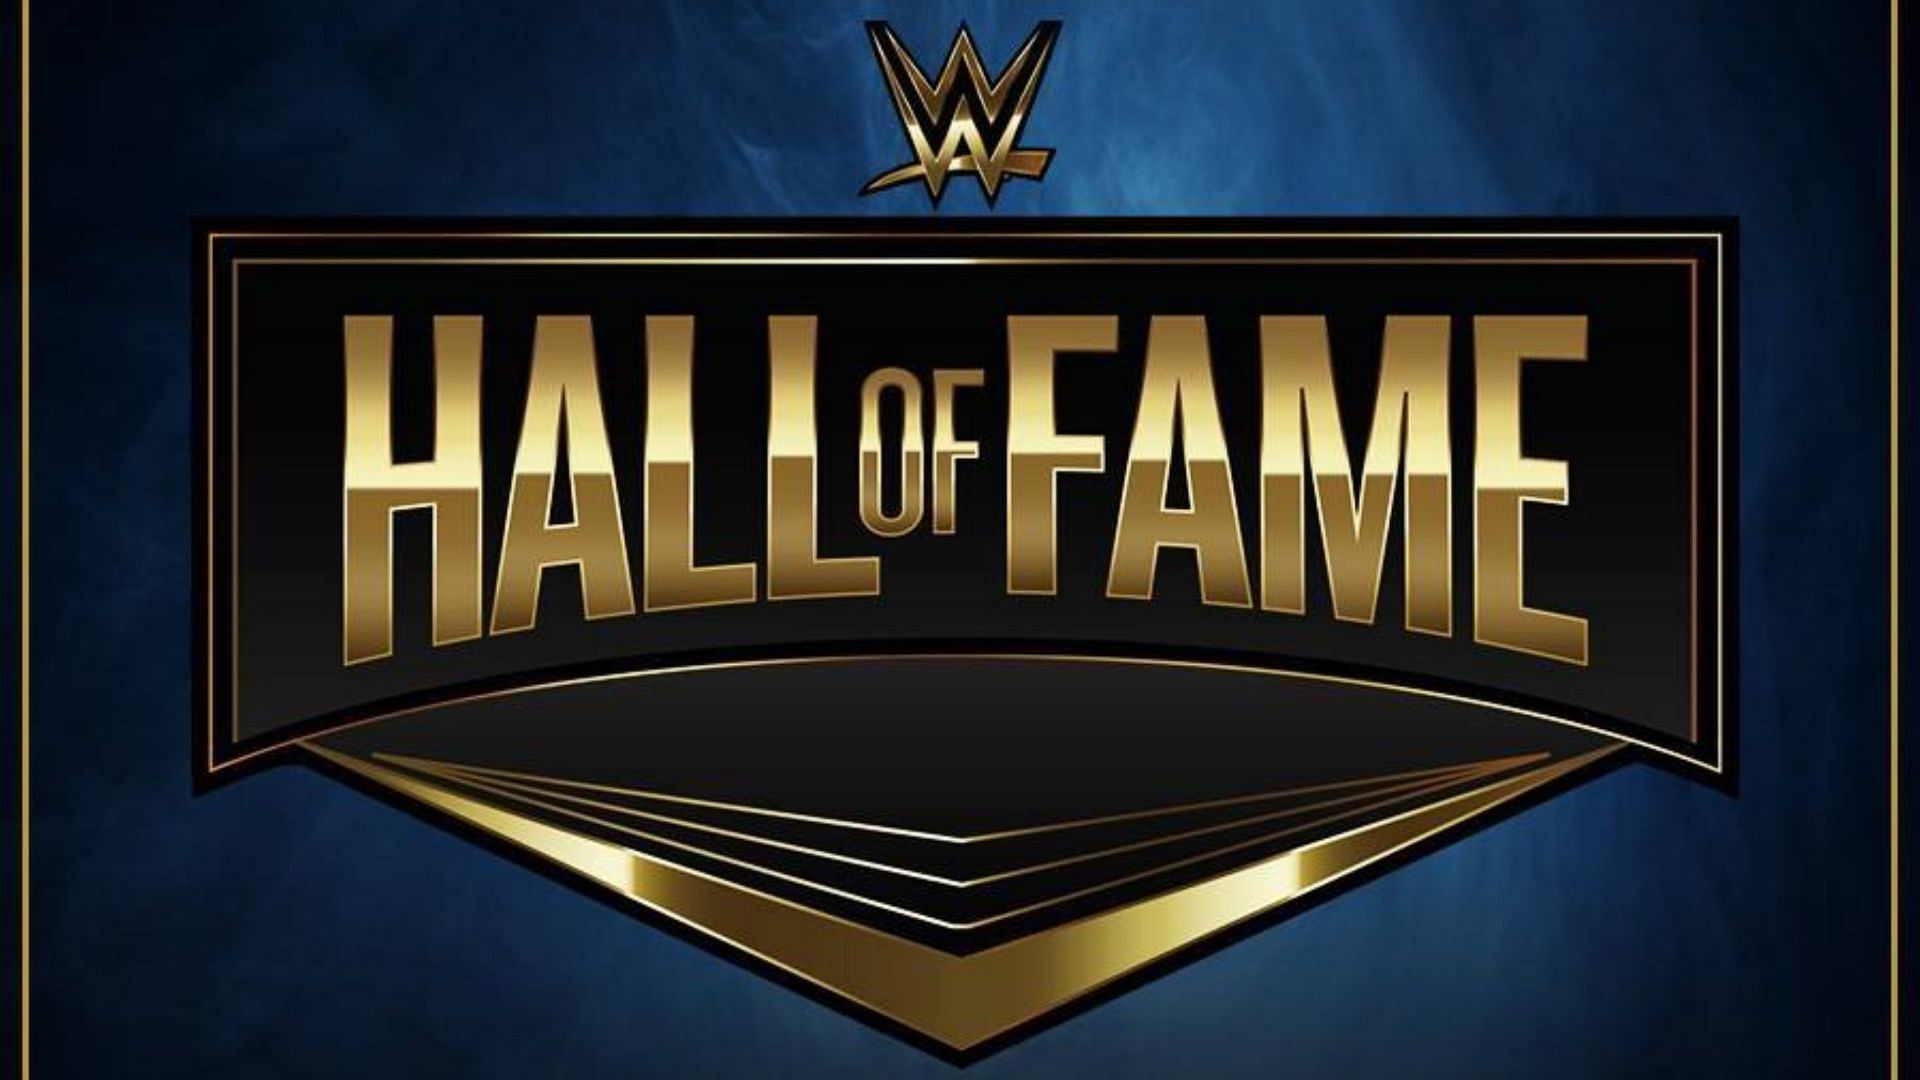 Is this former WWE superstar qualified to be a Hall of Famer?